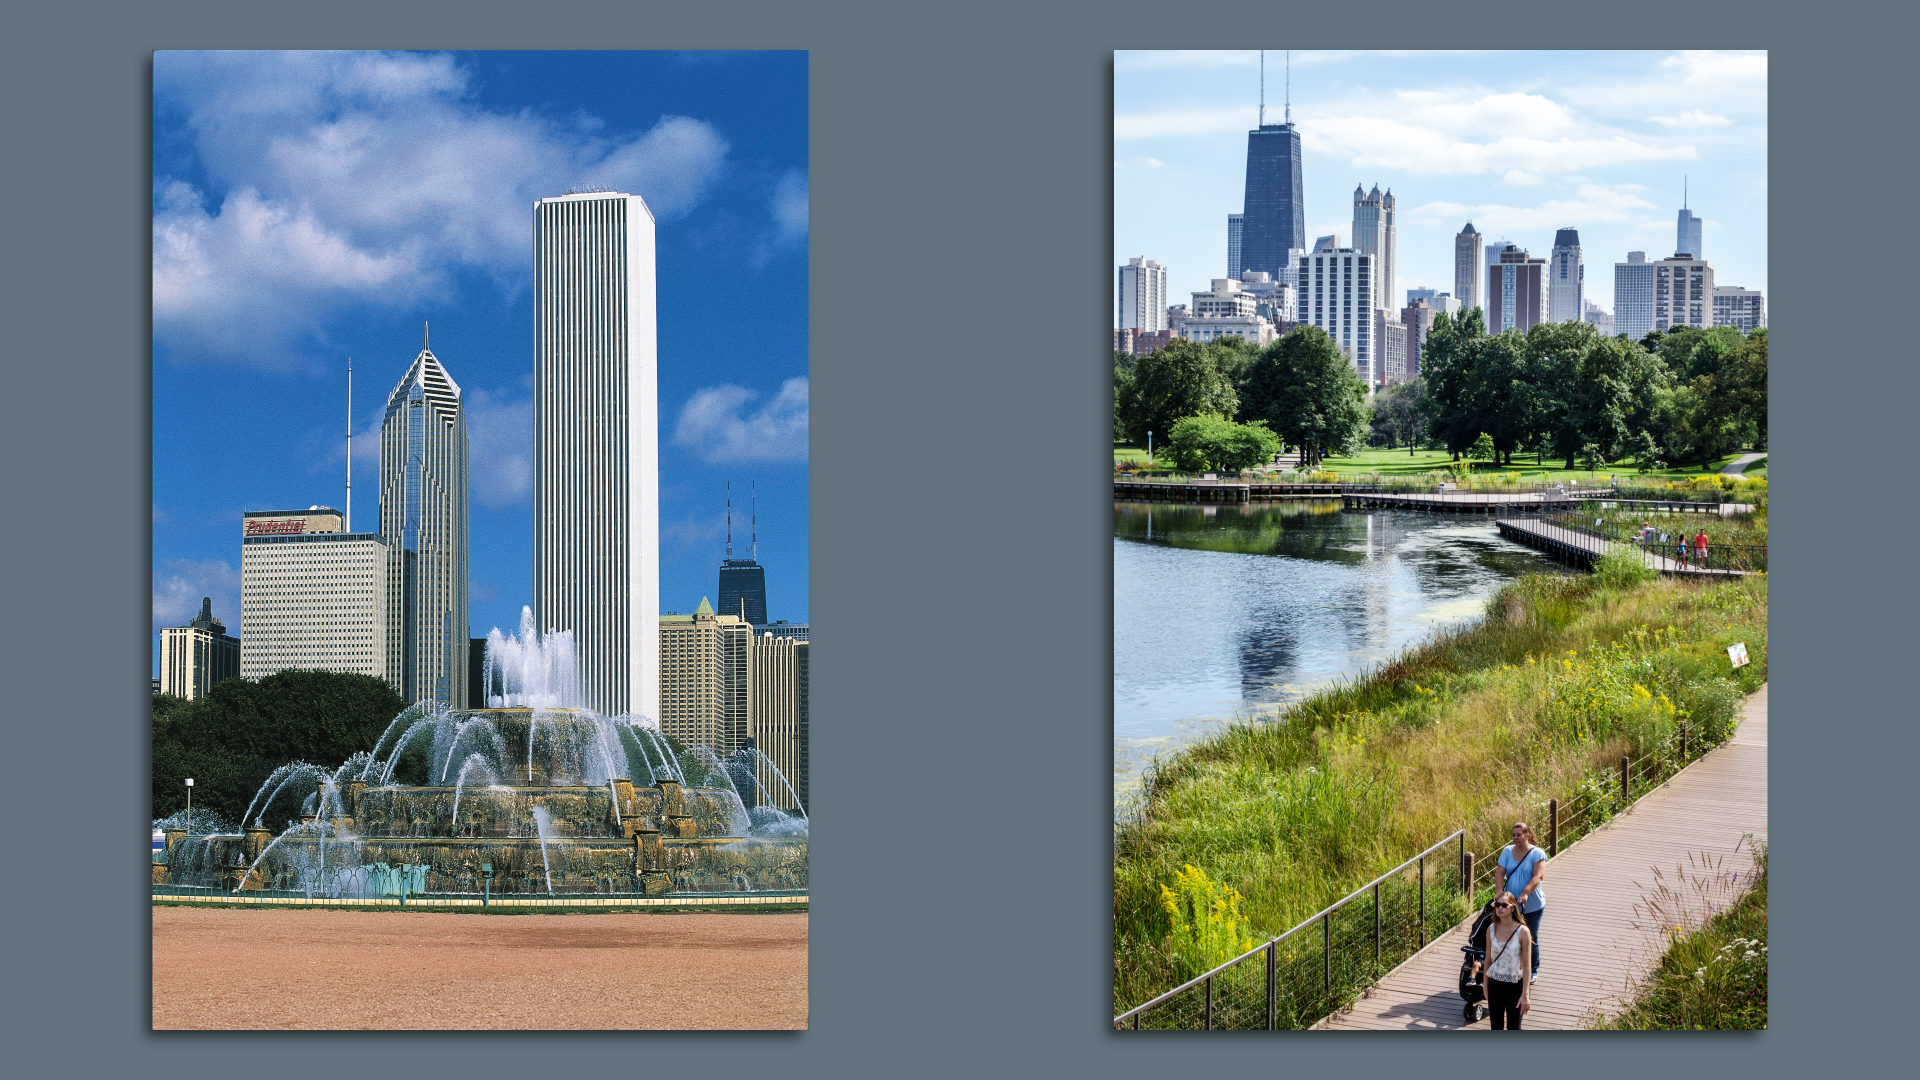 Two side-by-side photos. On the left, the Buckingham Fountain in Grant Park sprays water, with the Chicago skyline in the background. On the right, two people walk on the nature boardwalk in Lincoln Park, with the skyline in the background.